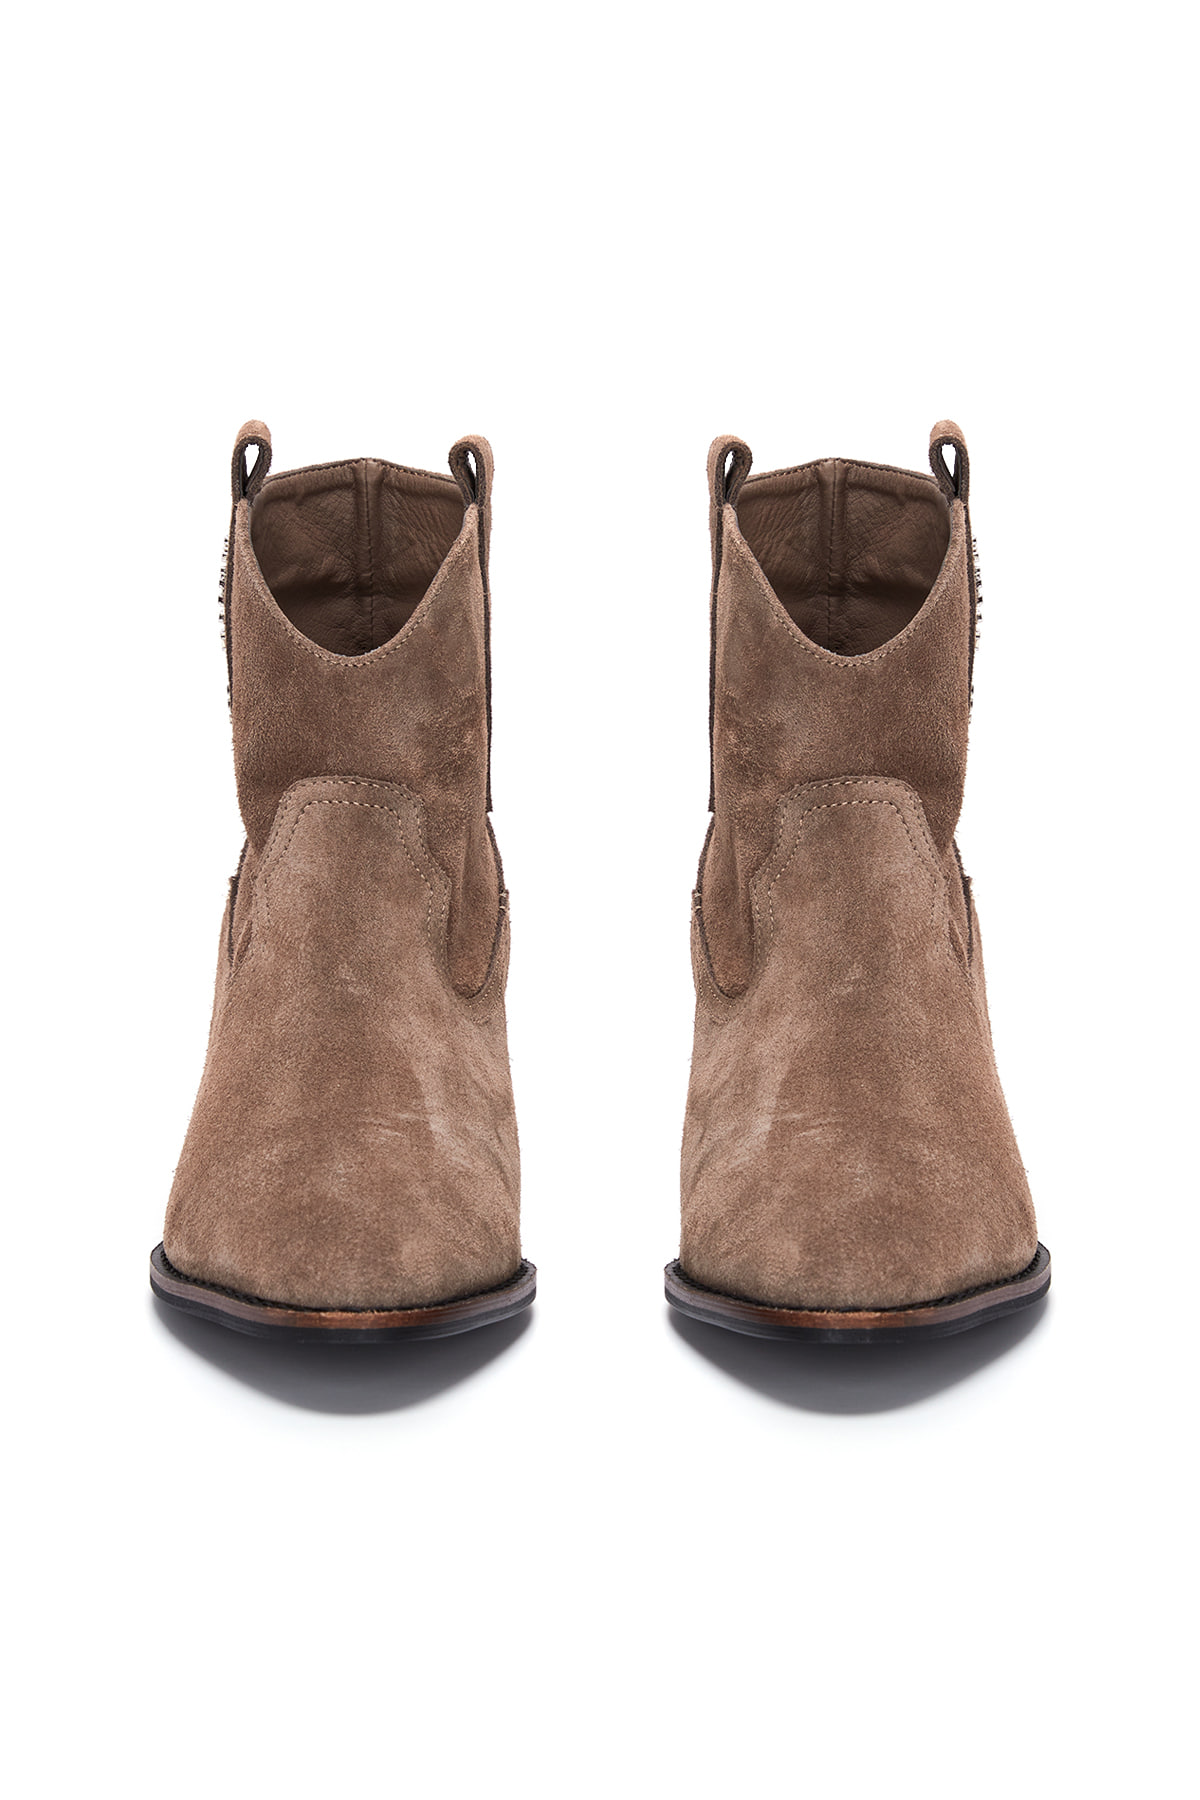 WESTERN ANKLE BOOTS IN KHAKI BROWN